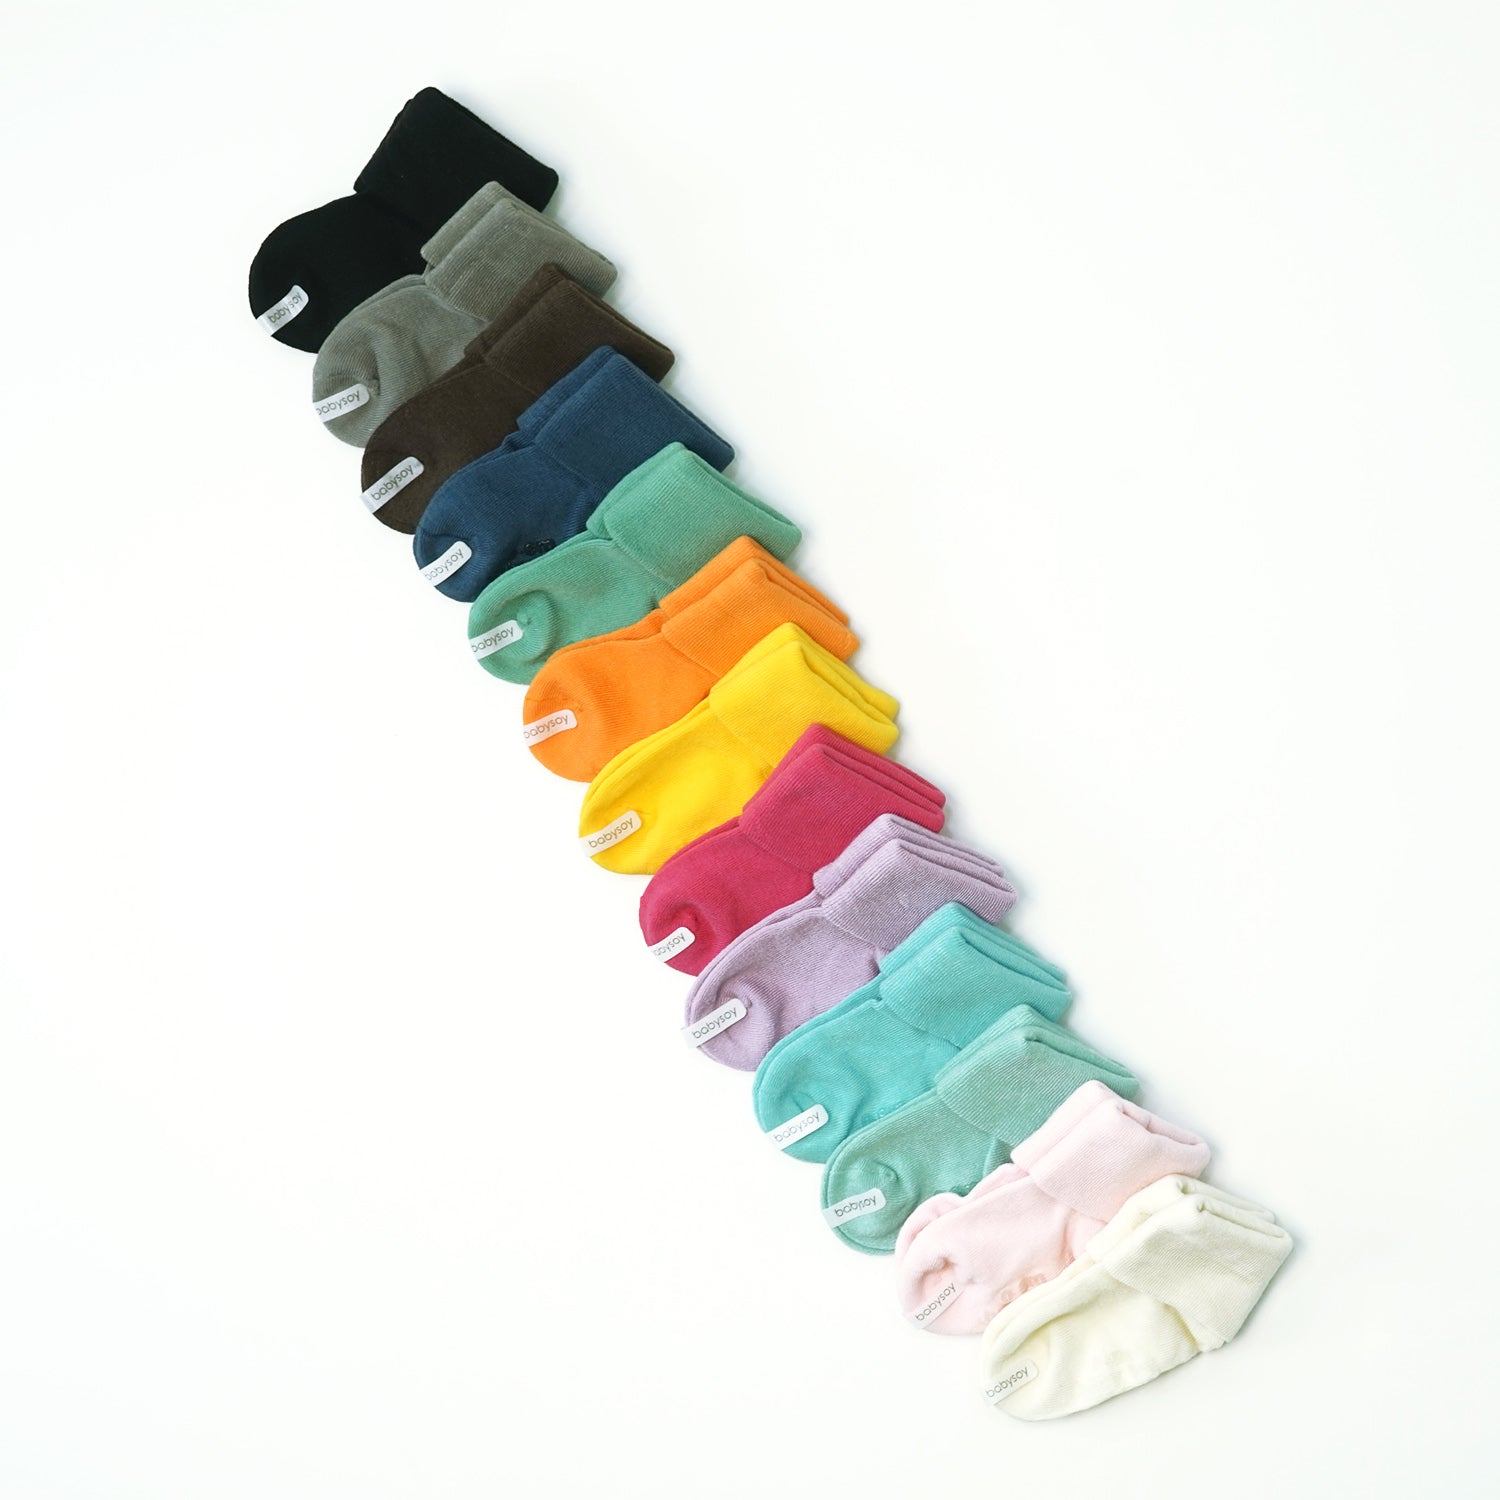 Babysoy Baby Socks Solid Colors That Stay-On with Grips Peony / 6-12 Months